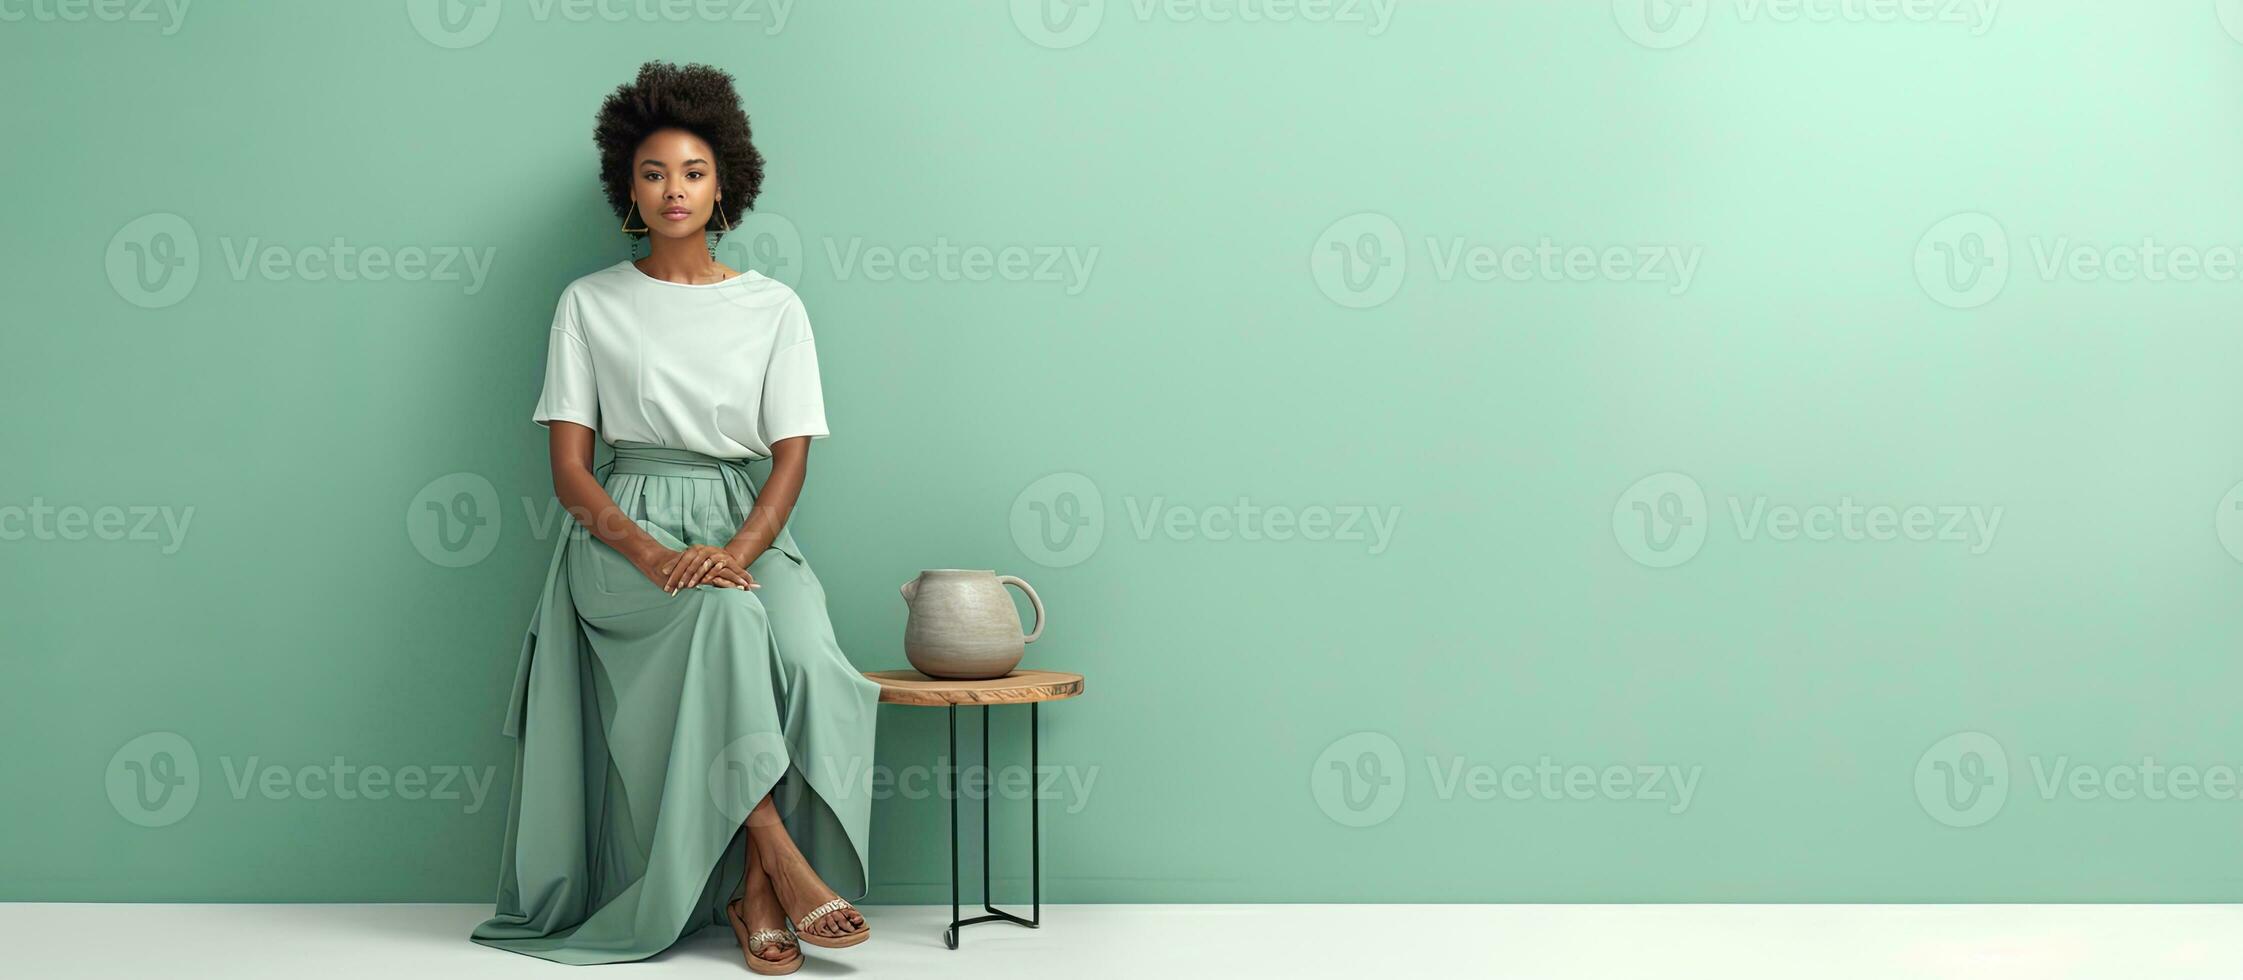 Fashionable African woman poses for full length portrait on light green background with copy space hands in pockets barefoot photo